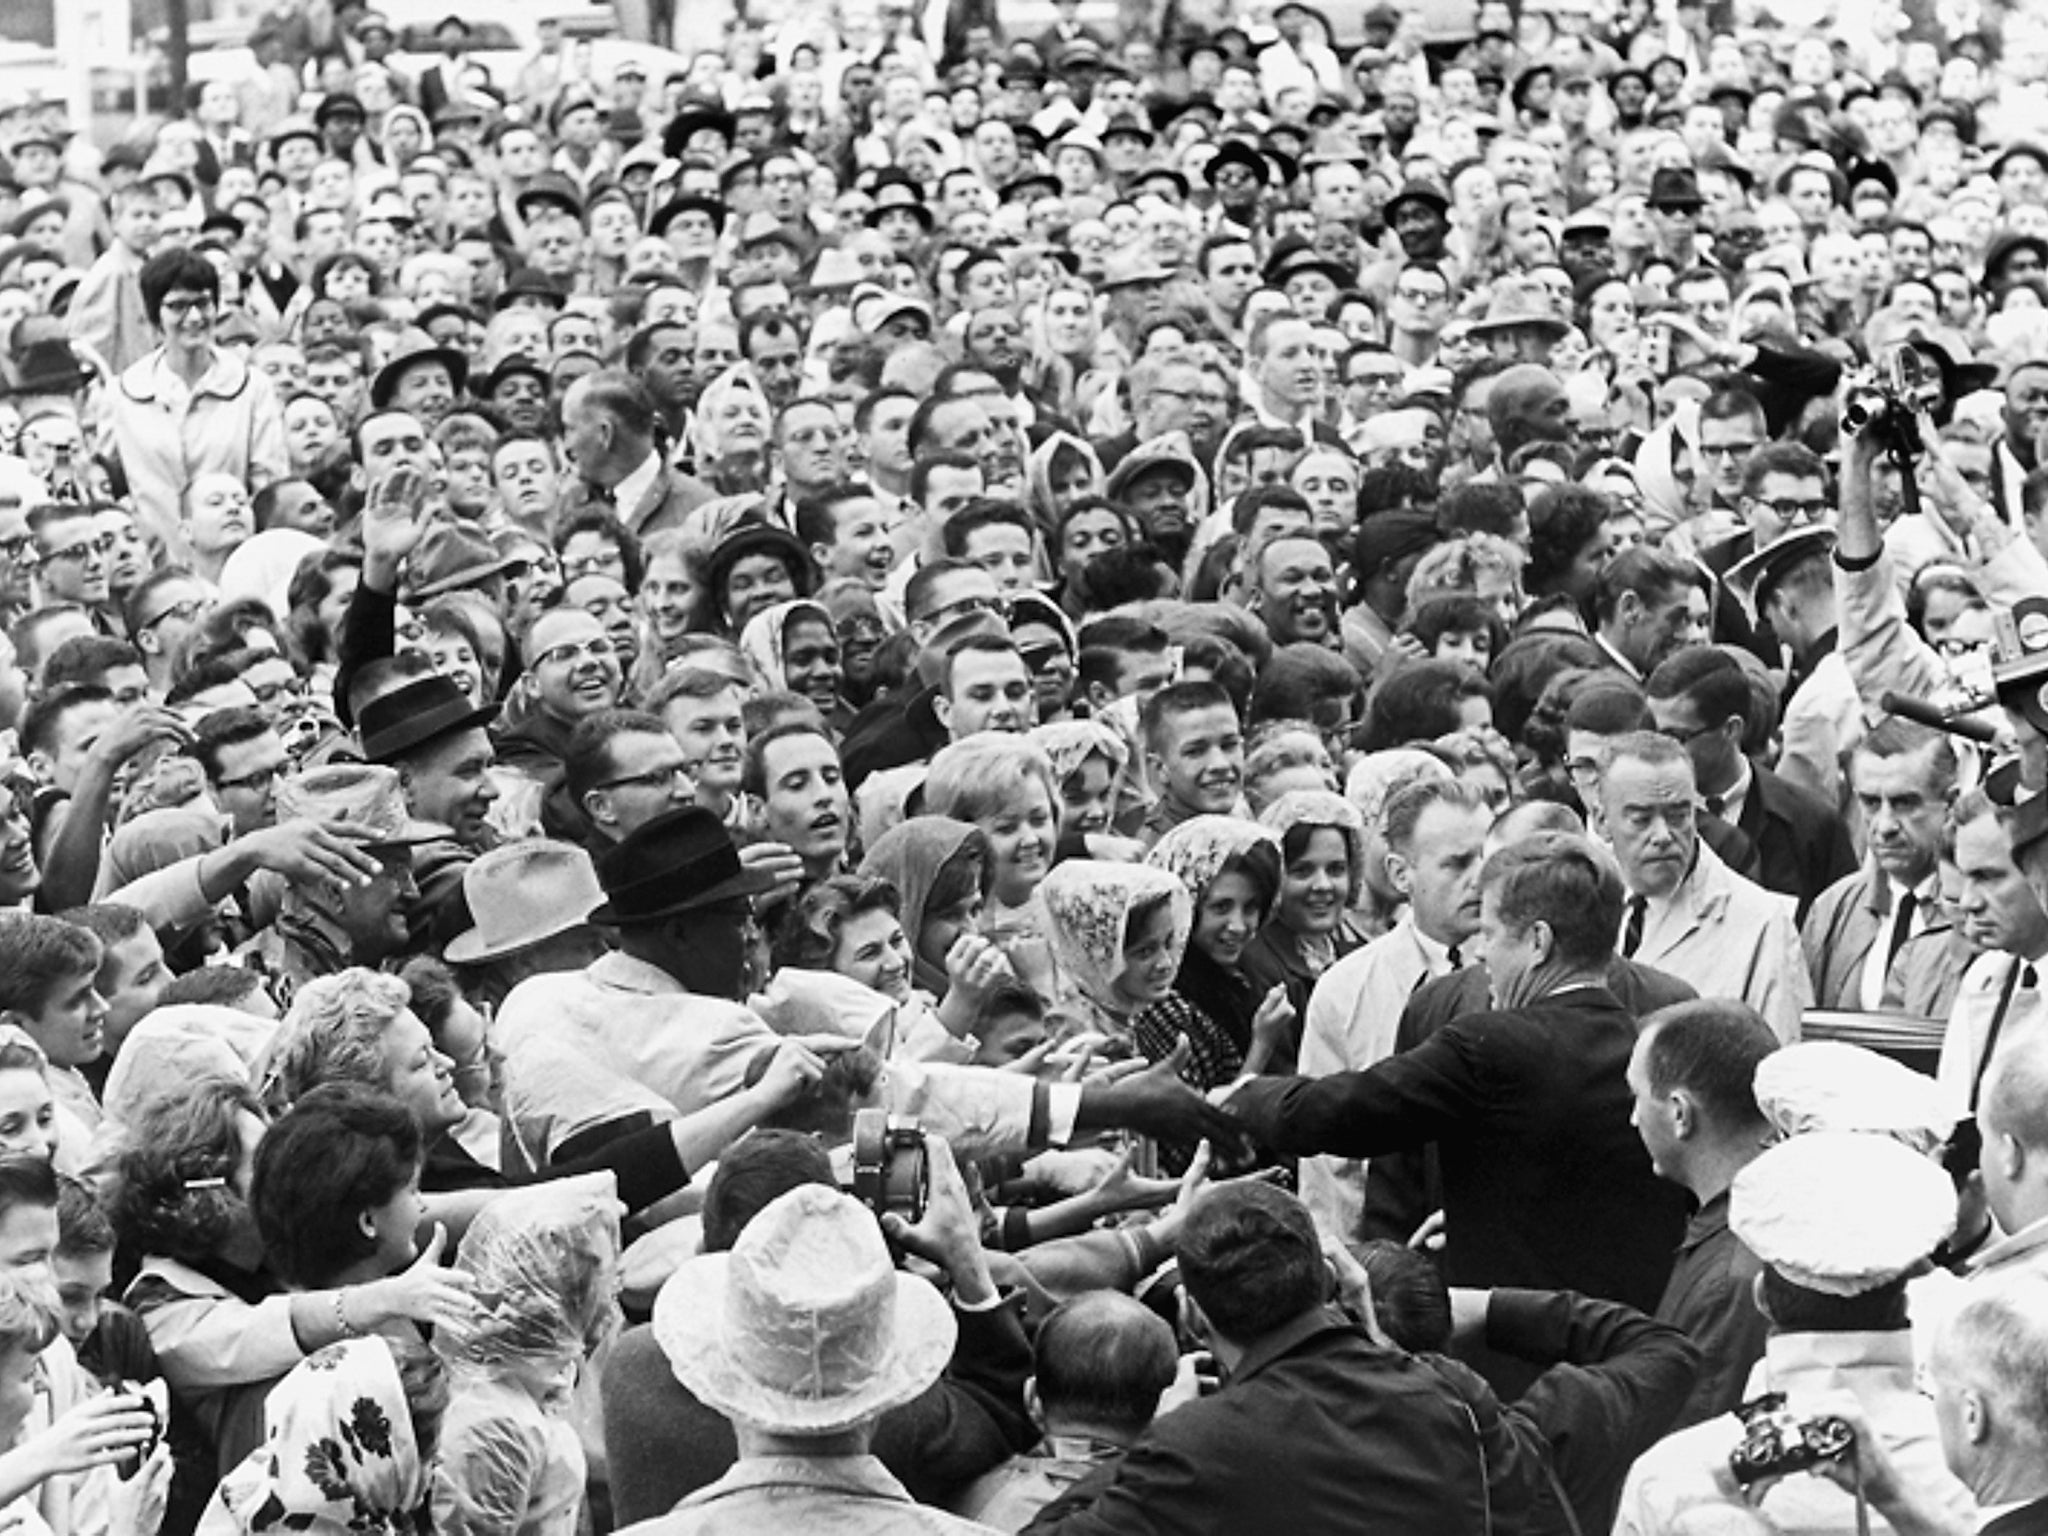 Kennedy at a rally in Fort Worth, Texas, just hours before he was assassinated on 22 November 1963